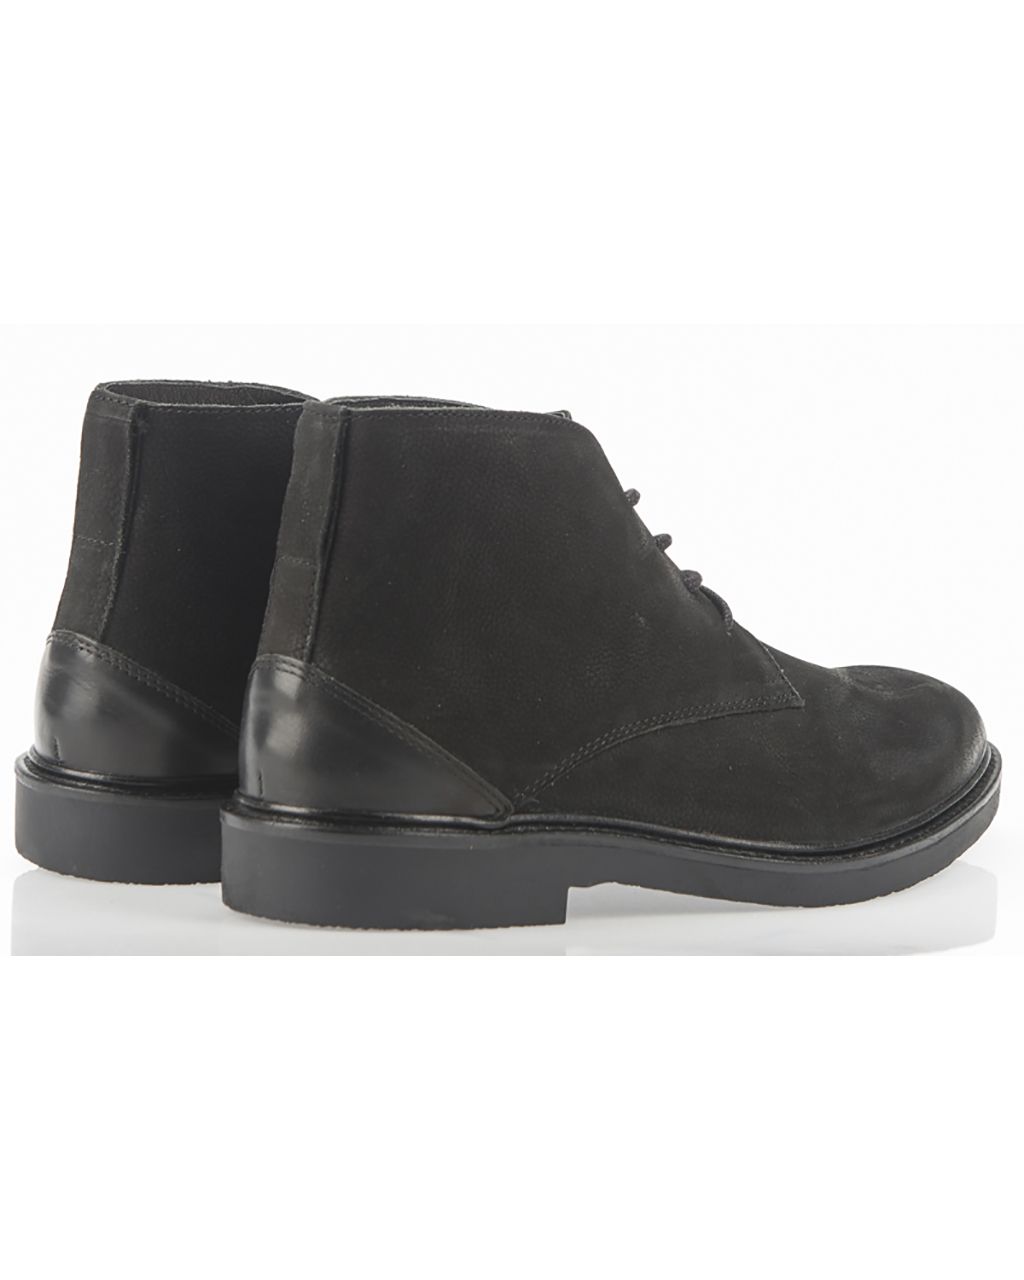 Campbell Classic Casual Boots Zwart uni 070110-001-40